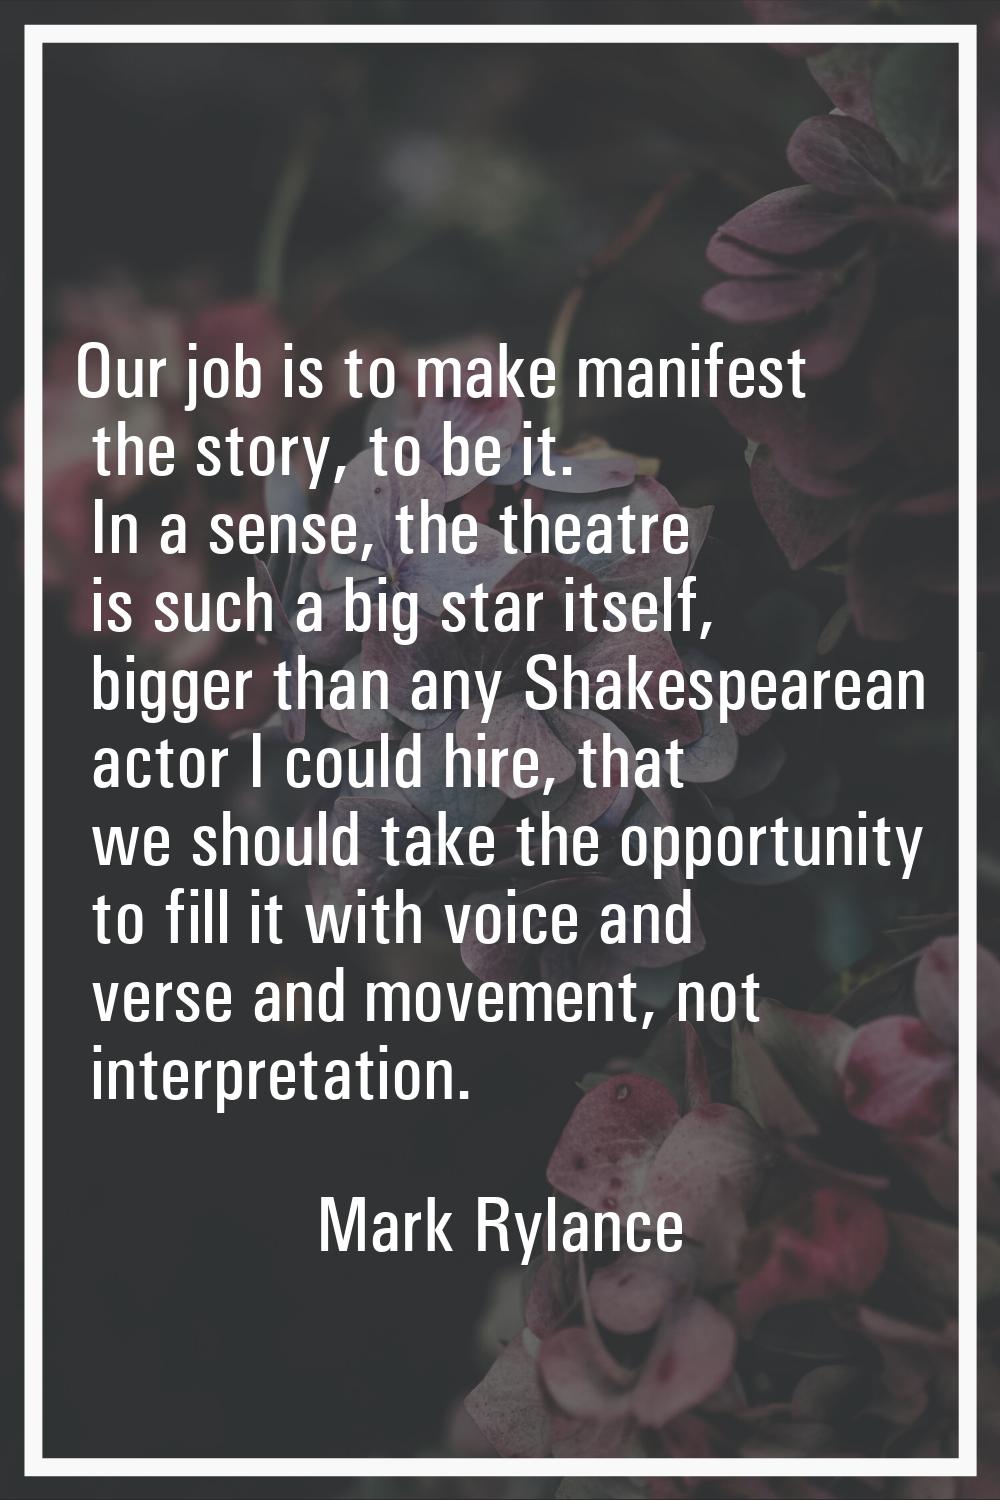 Our job is to make manifest the story, to be it. In a sense, the theatre is such a big star itself,